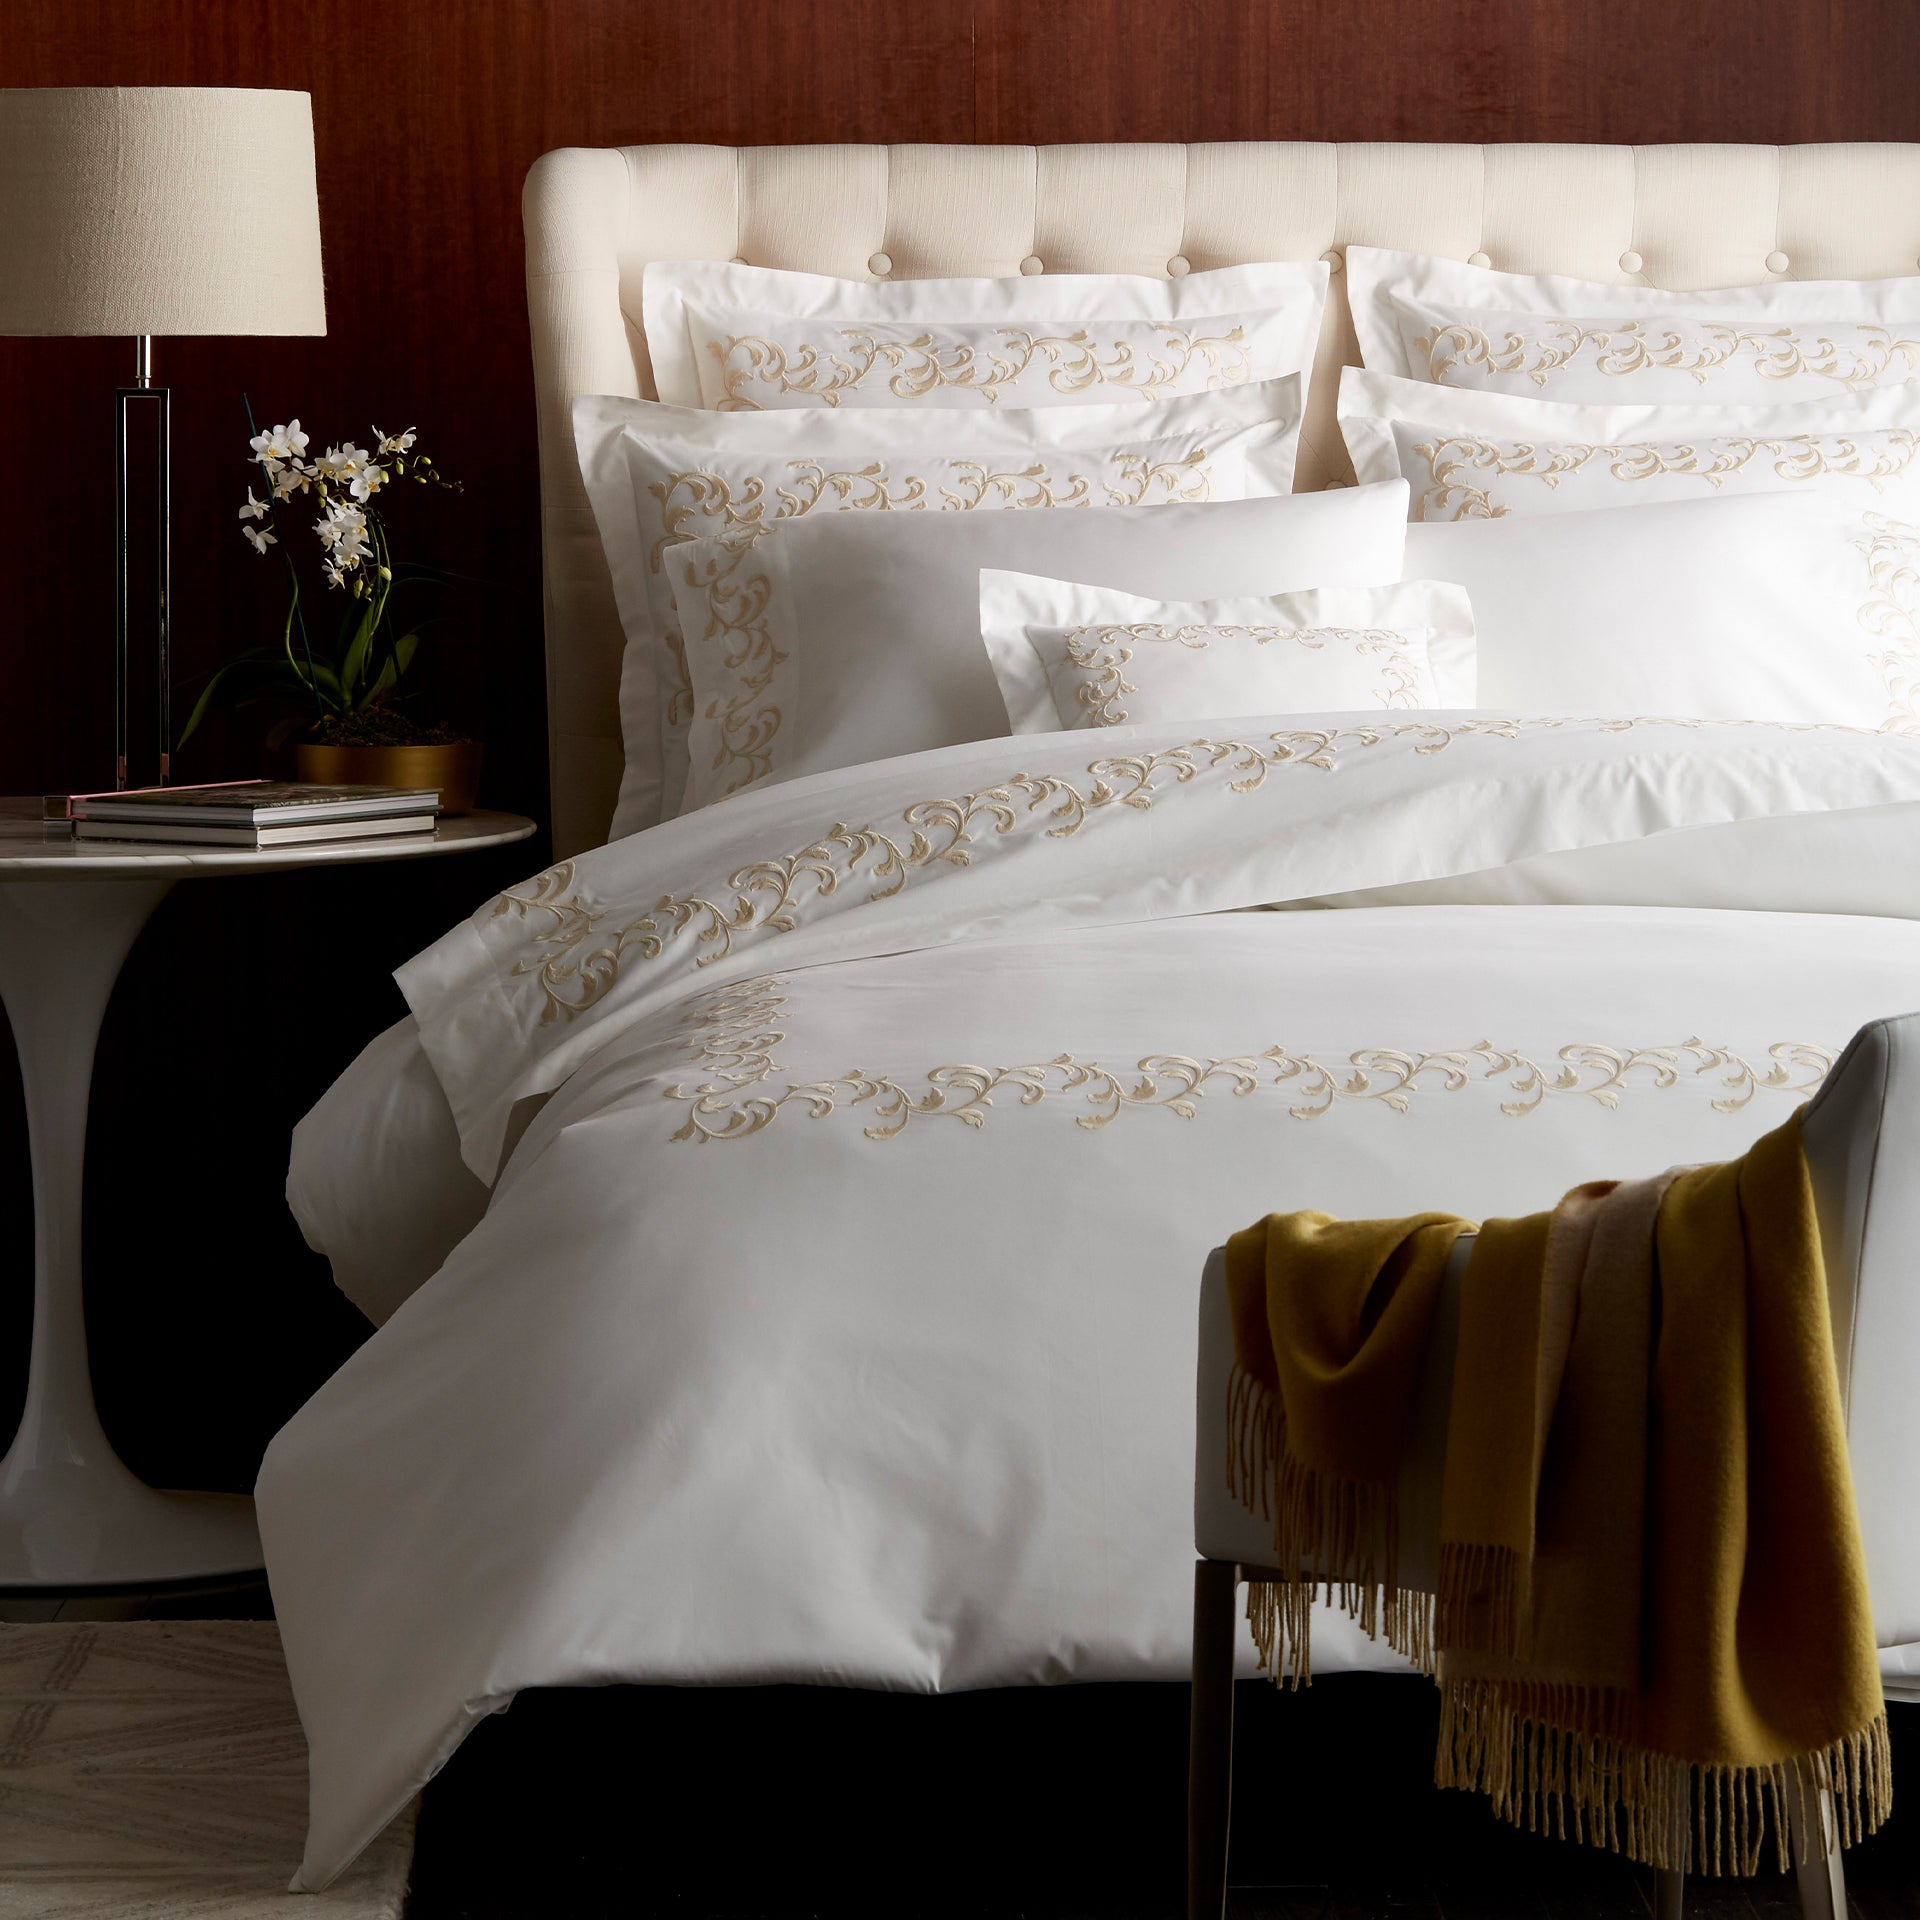 san remo duvet cover with scroll embroidered detail in color cornsilk &amp; ivory. Knife edge design with button closure 